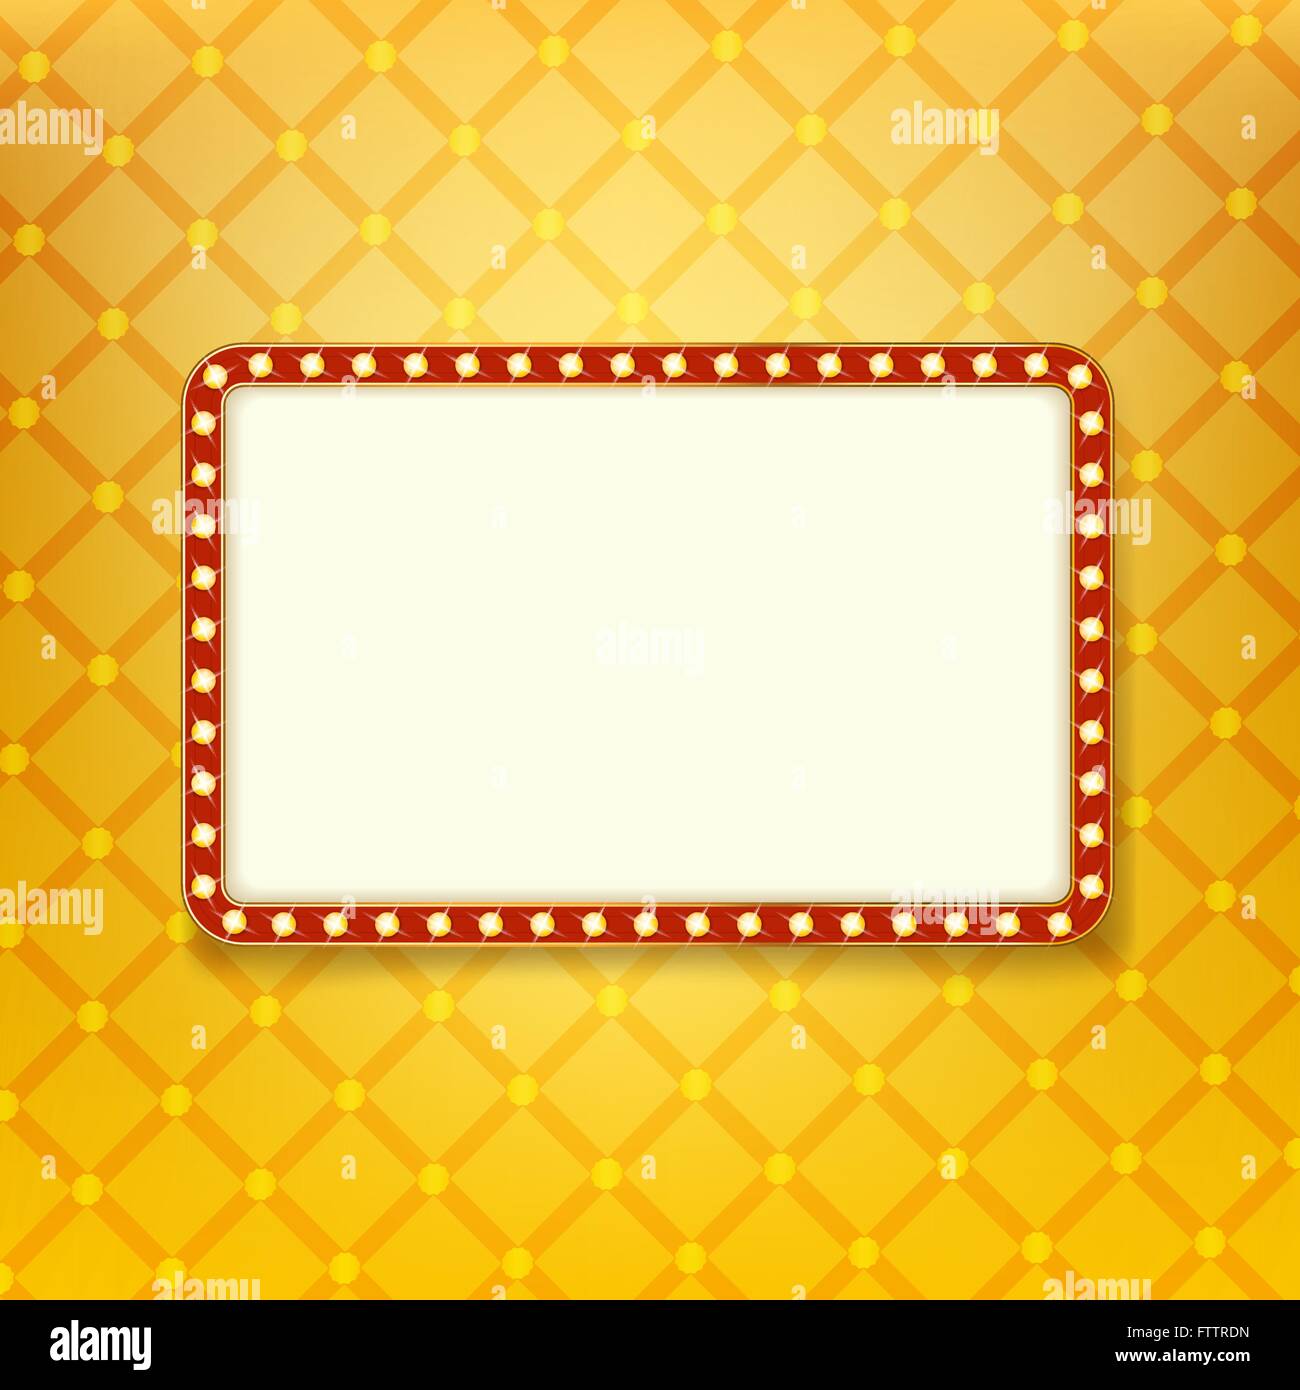 Shining light banner. Retro golden frame with neon lights. Billboard with space for text on background with royal pattern Stock Vector